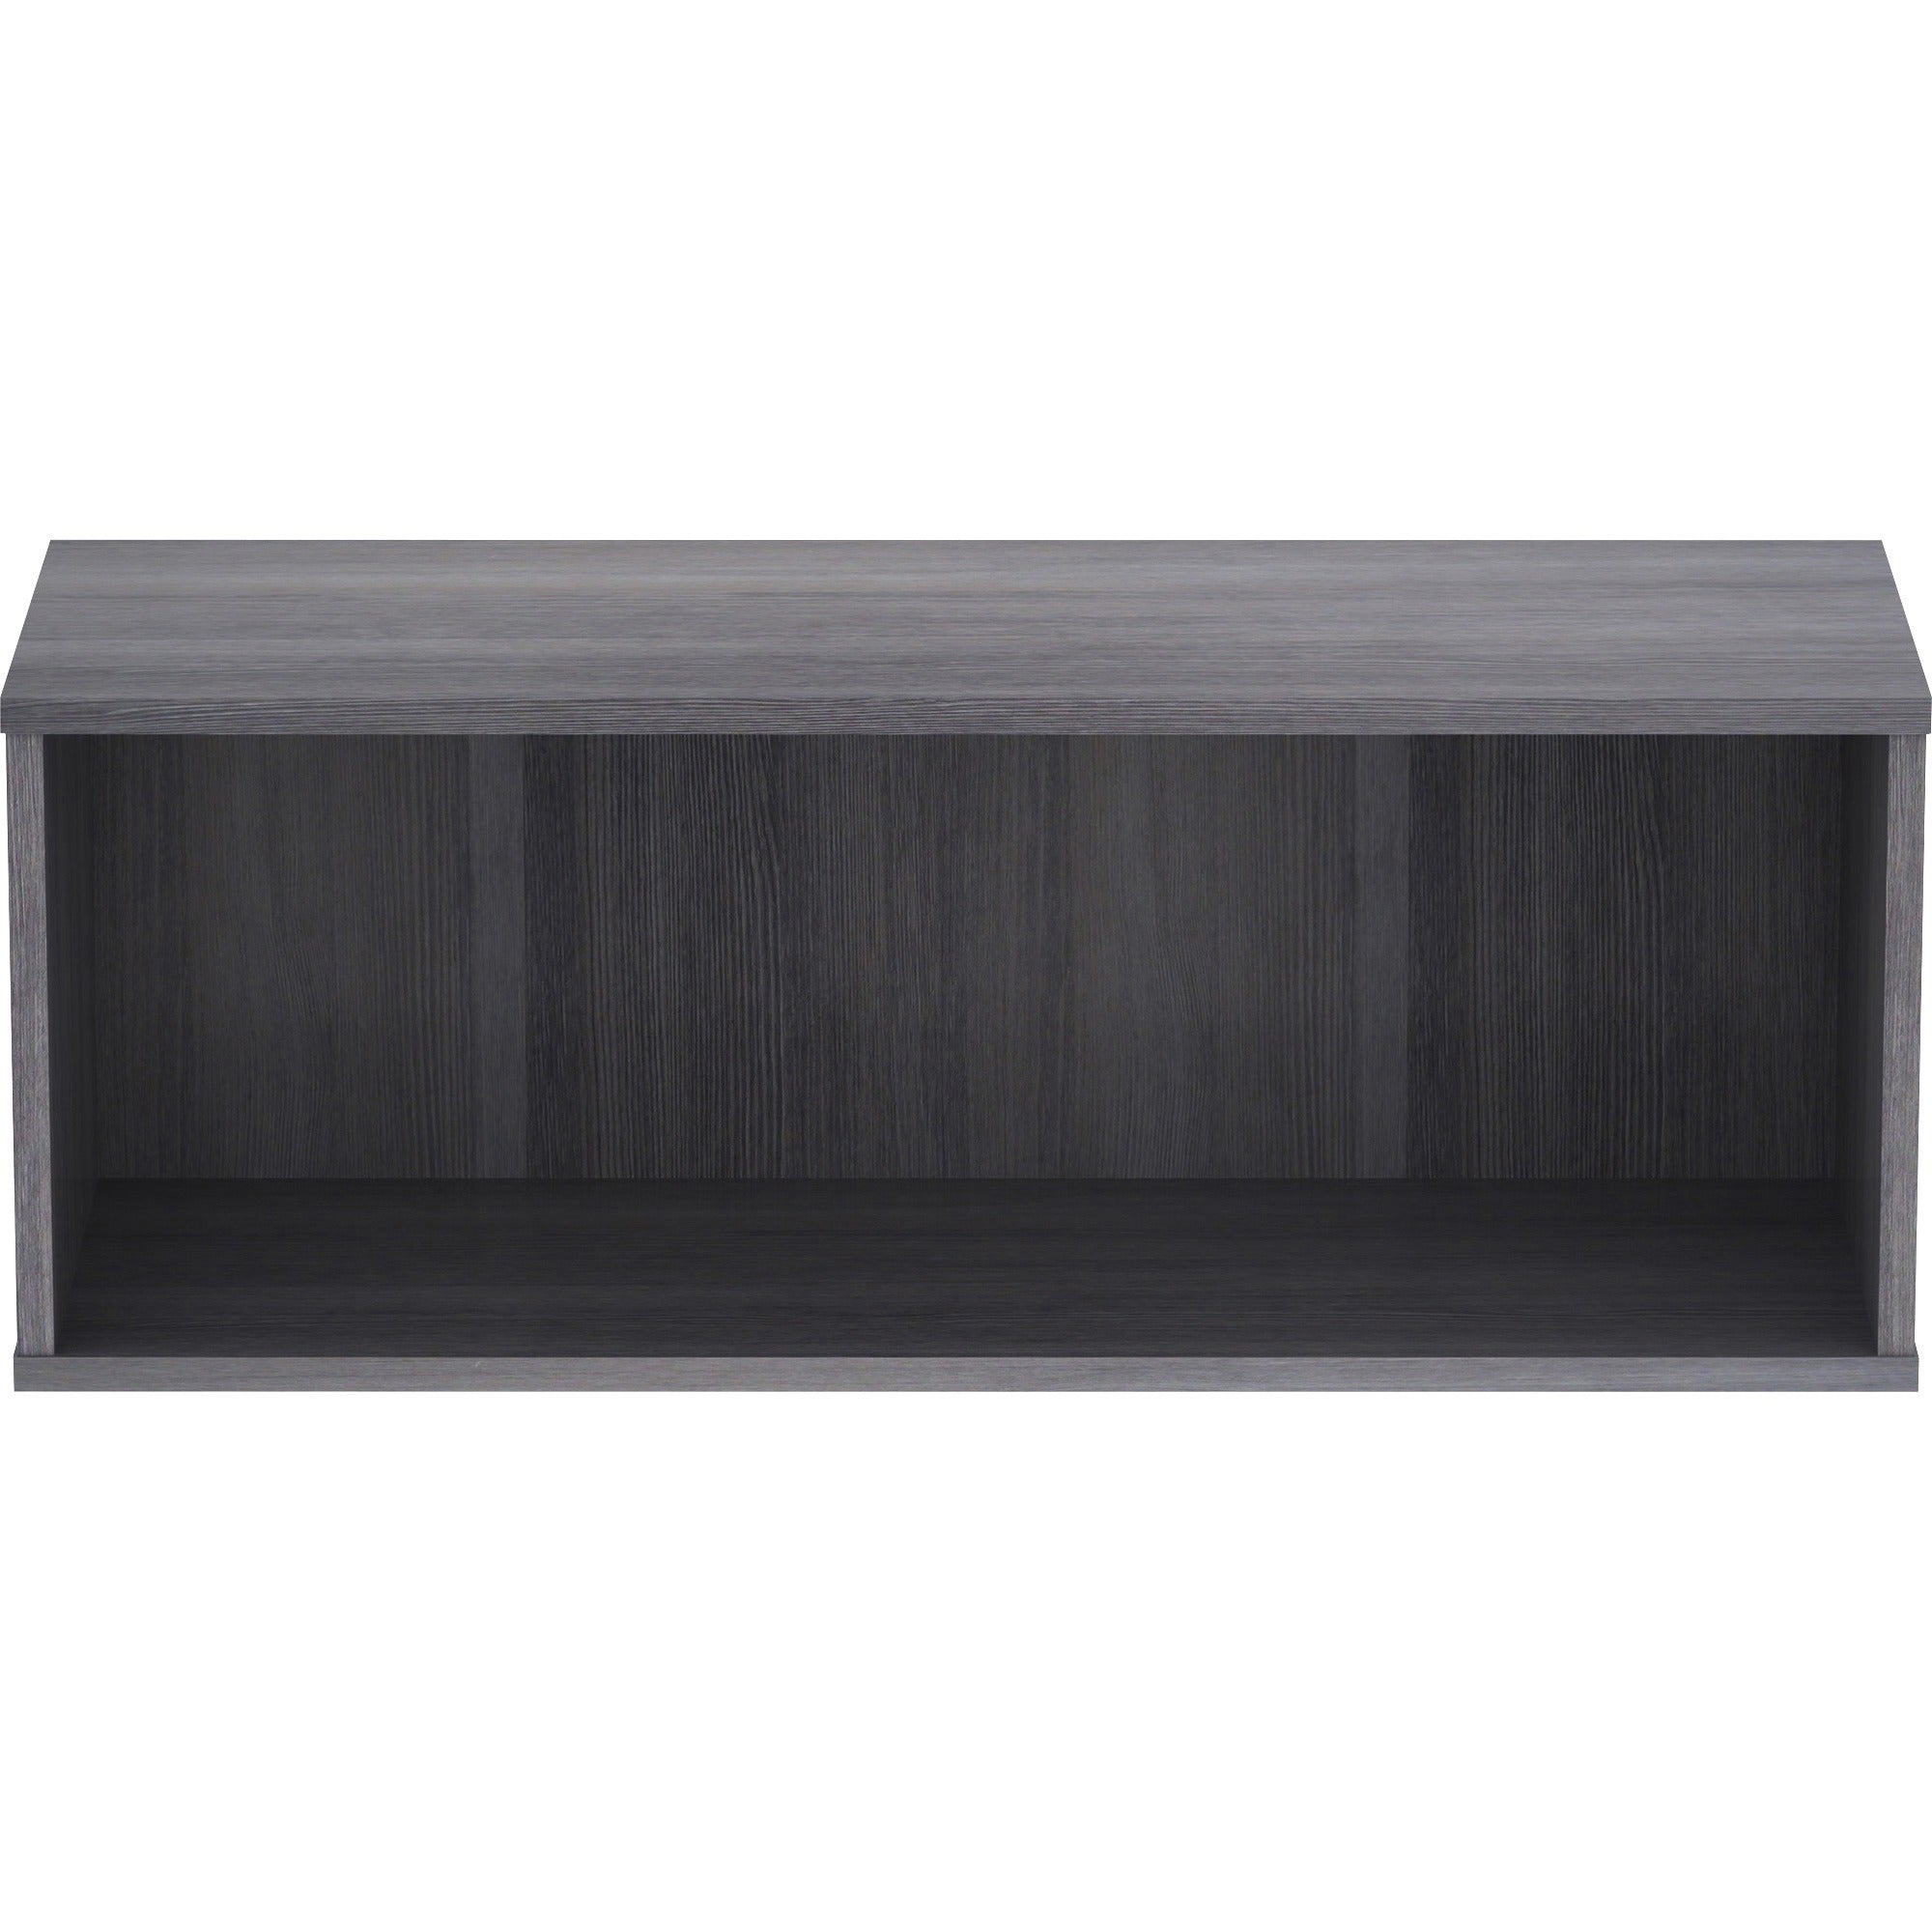 lorell-panel-system-open-storage-cabinet-181-height-x-315-width-x-158-depth-charcoal-laminate-1-each_llr90281 - 2